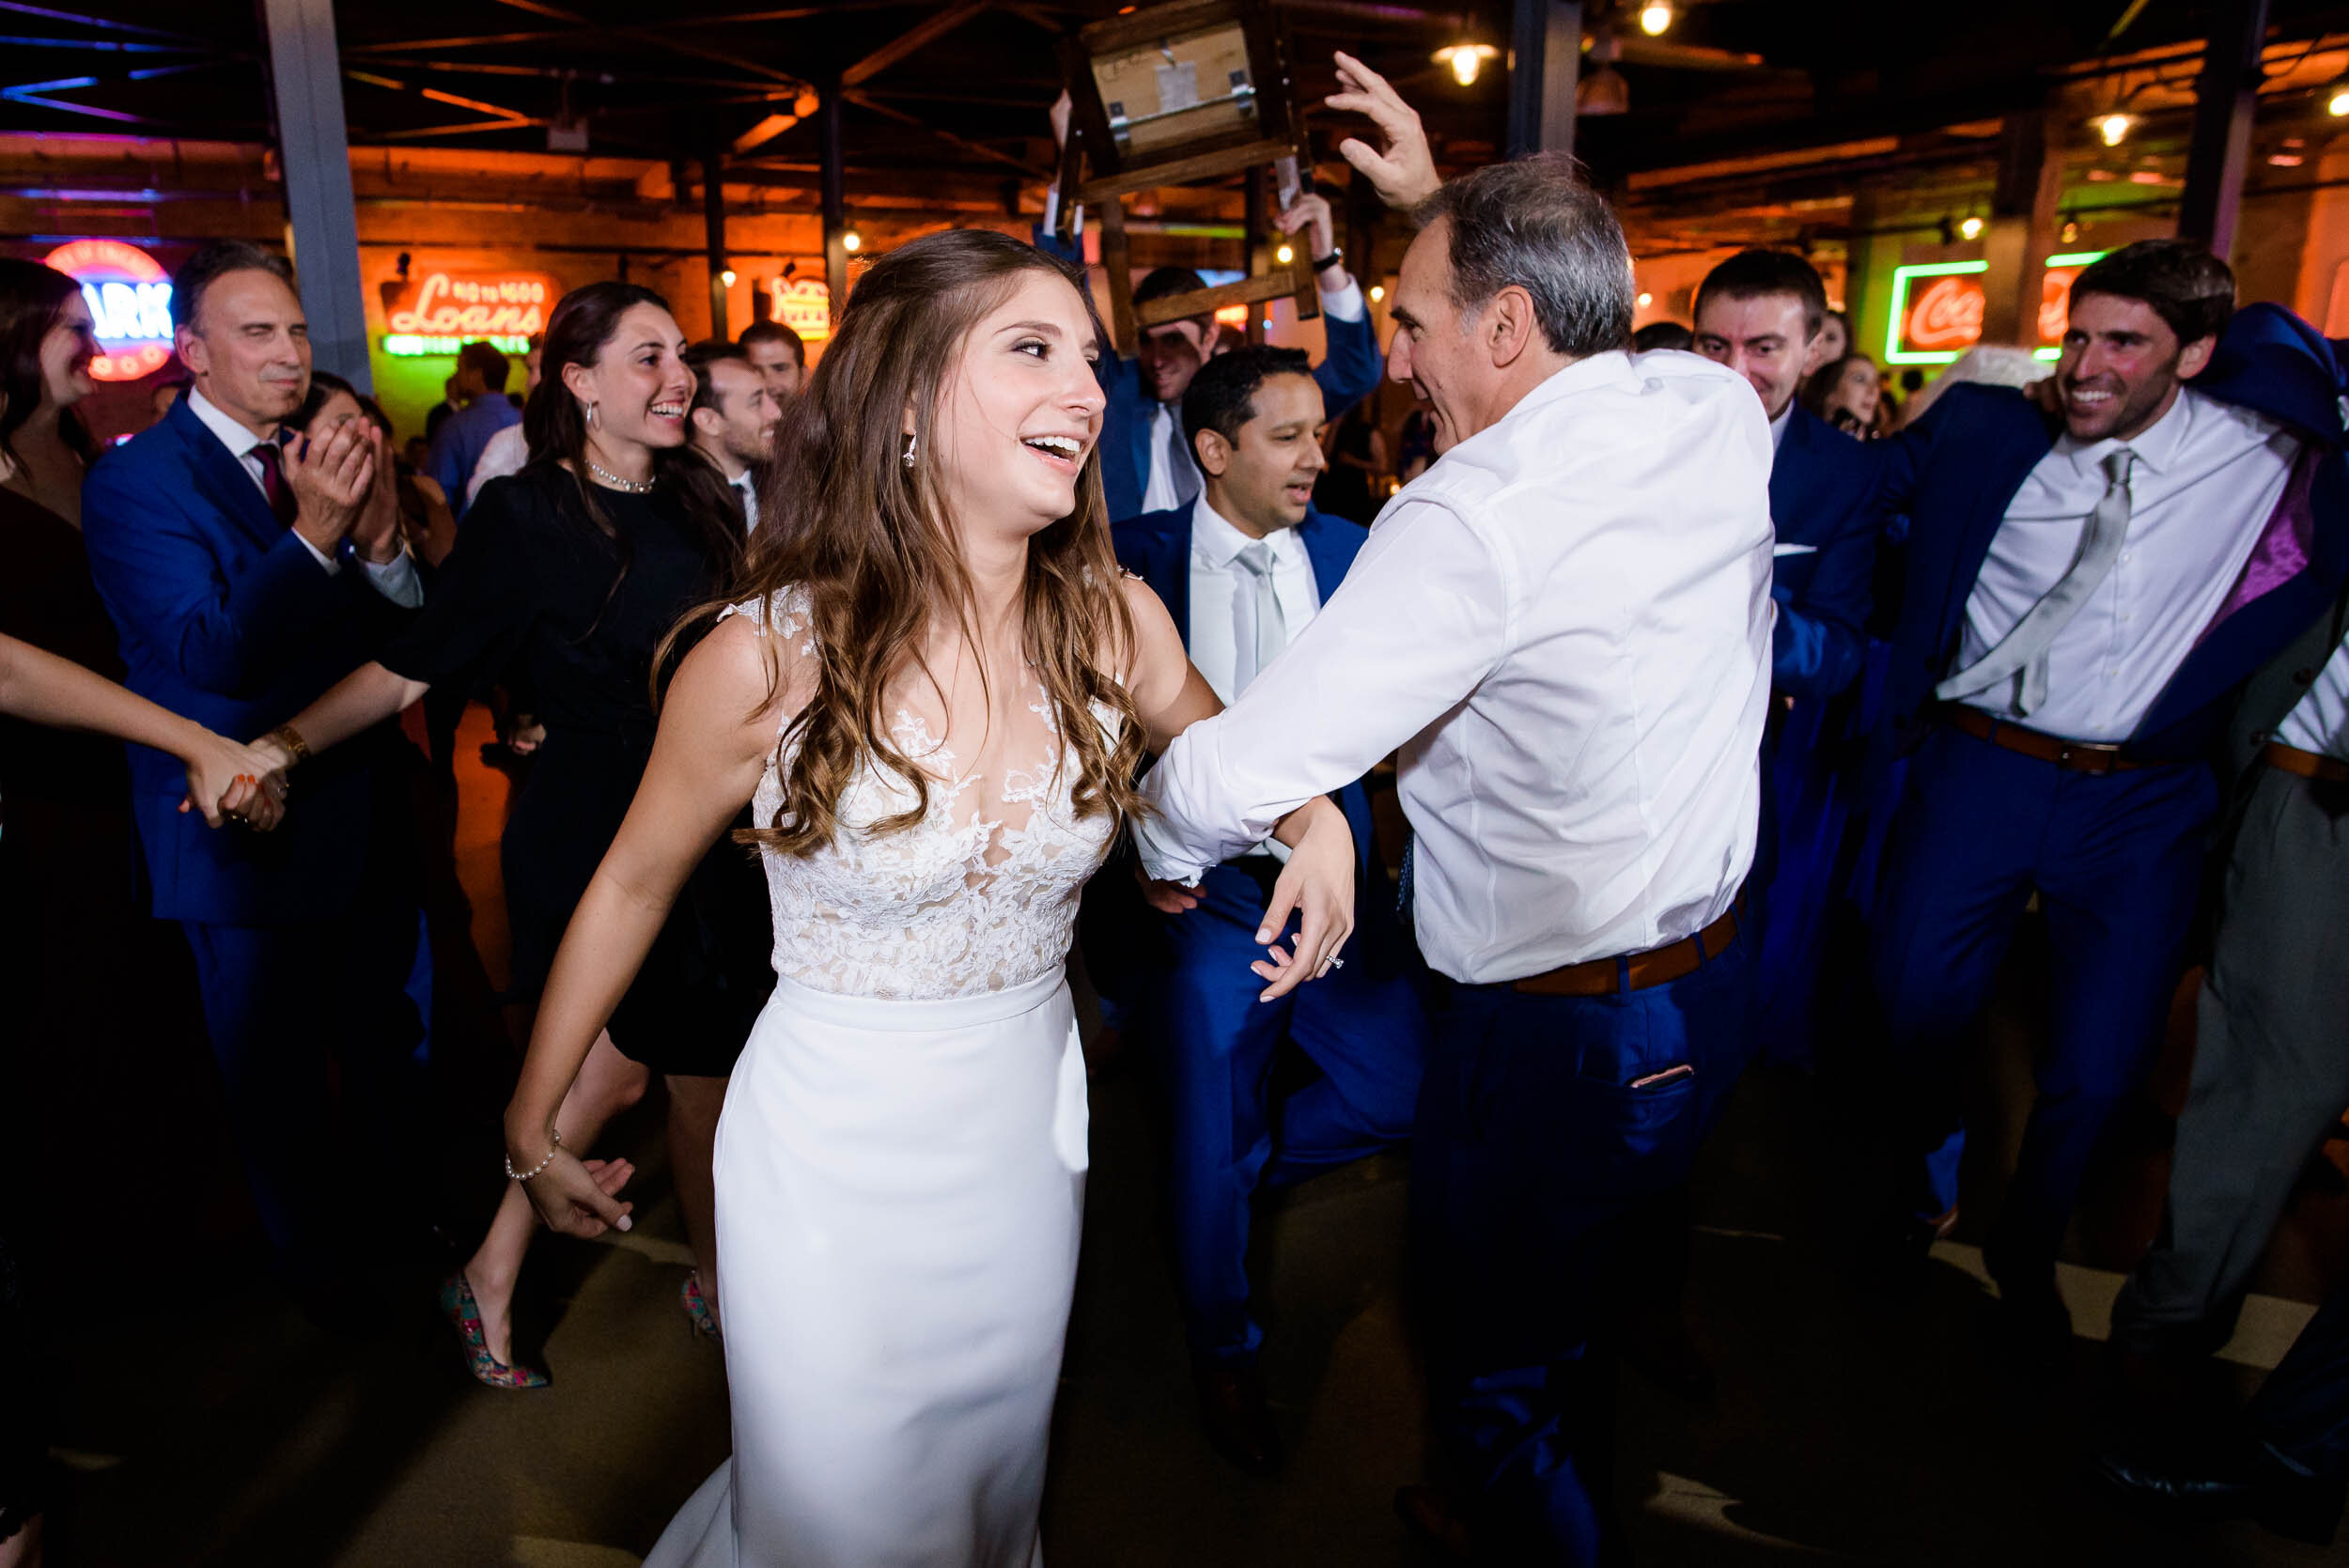 Bride dances during the horah: Ravenswood Event Center Chicago wedding captured by J. Brown Photography.  